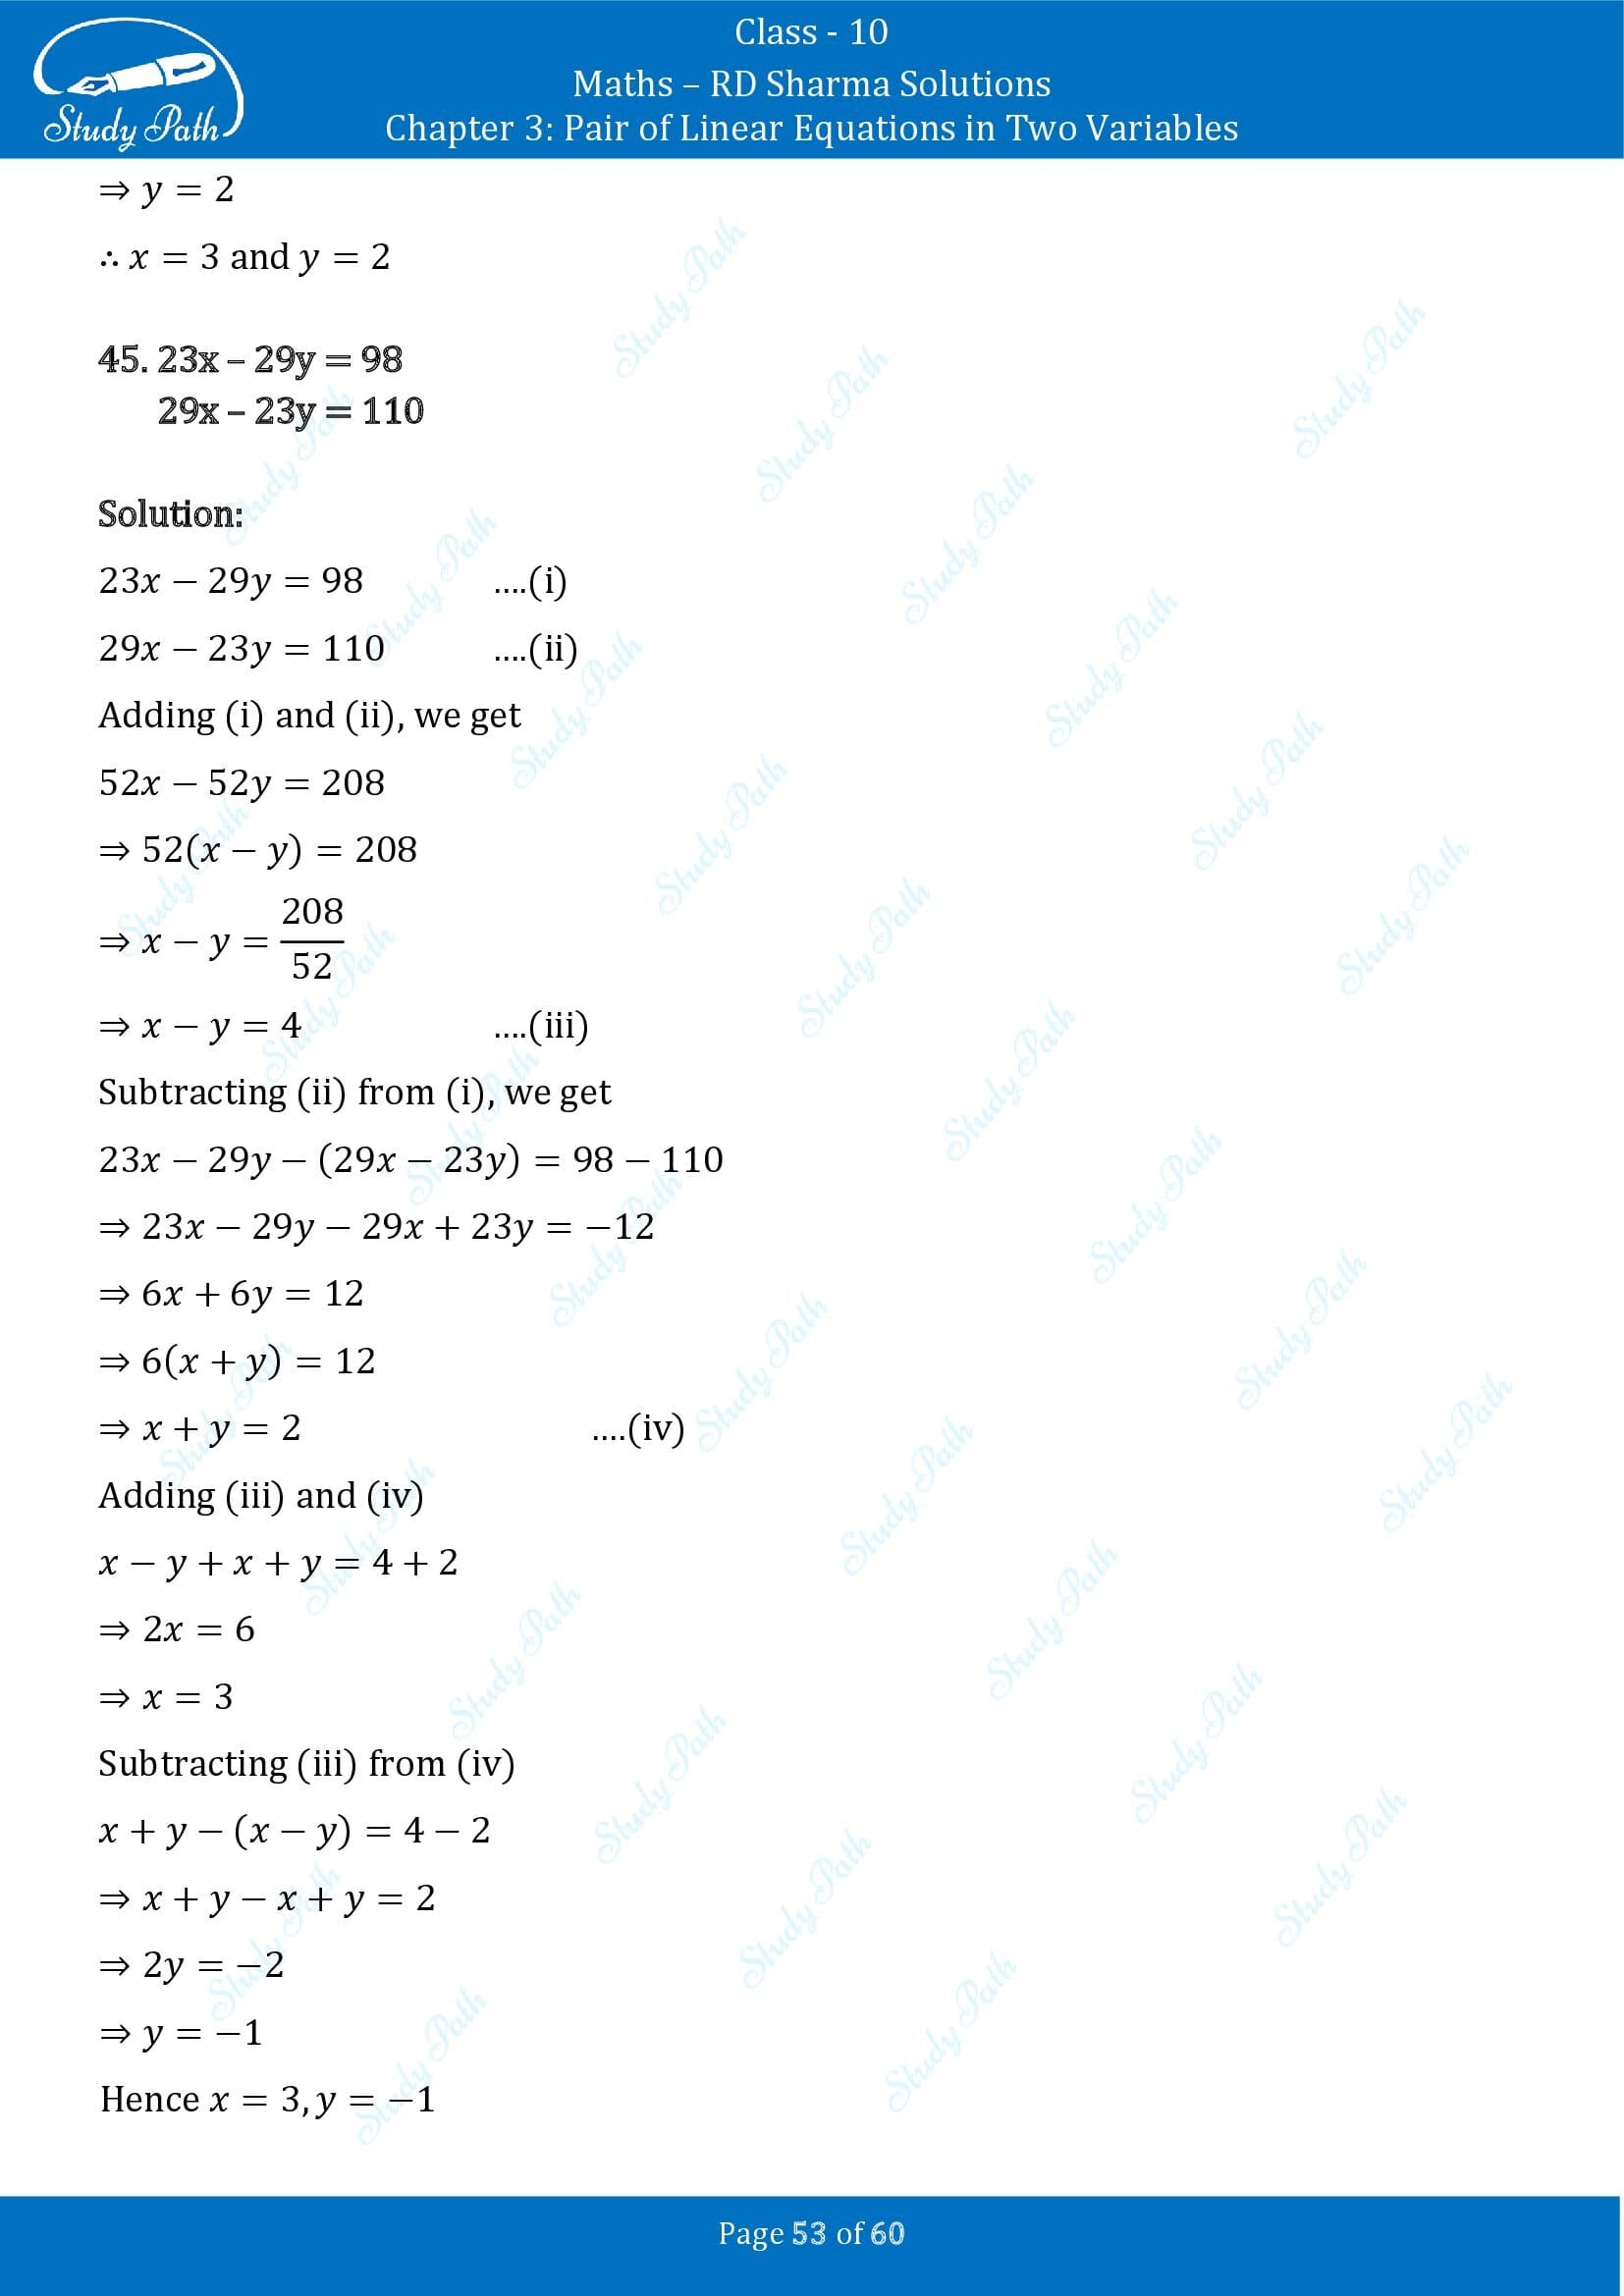 RD Sharma Solutions Class 10 Chapter 3 Pair of Linear Equations in Two Variables Exercise 3.3 00053